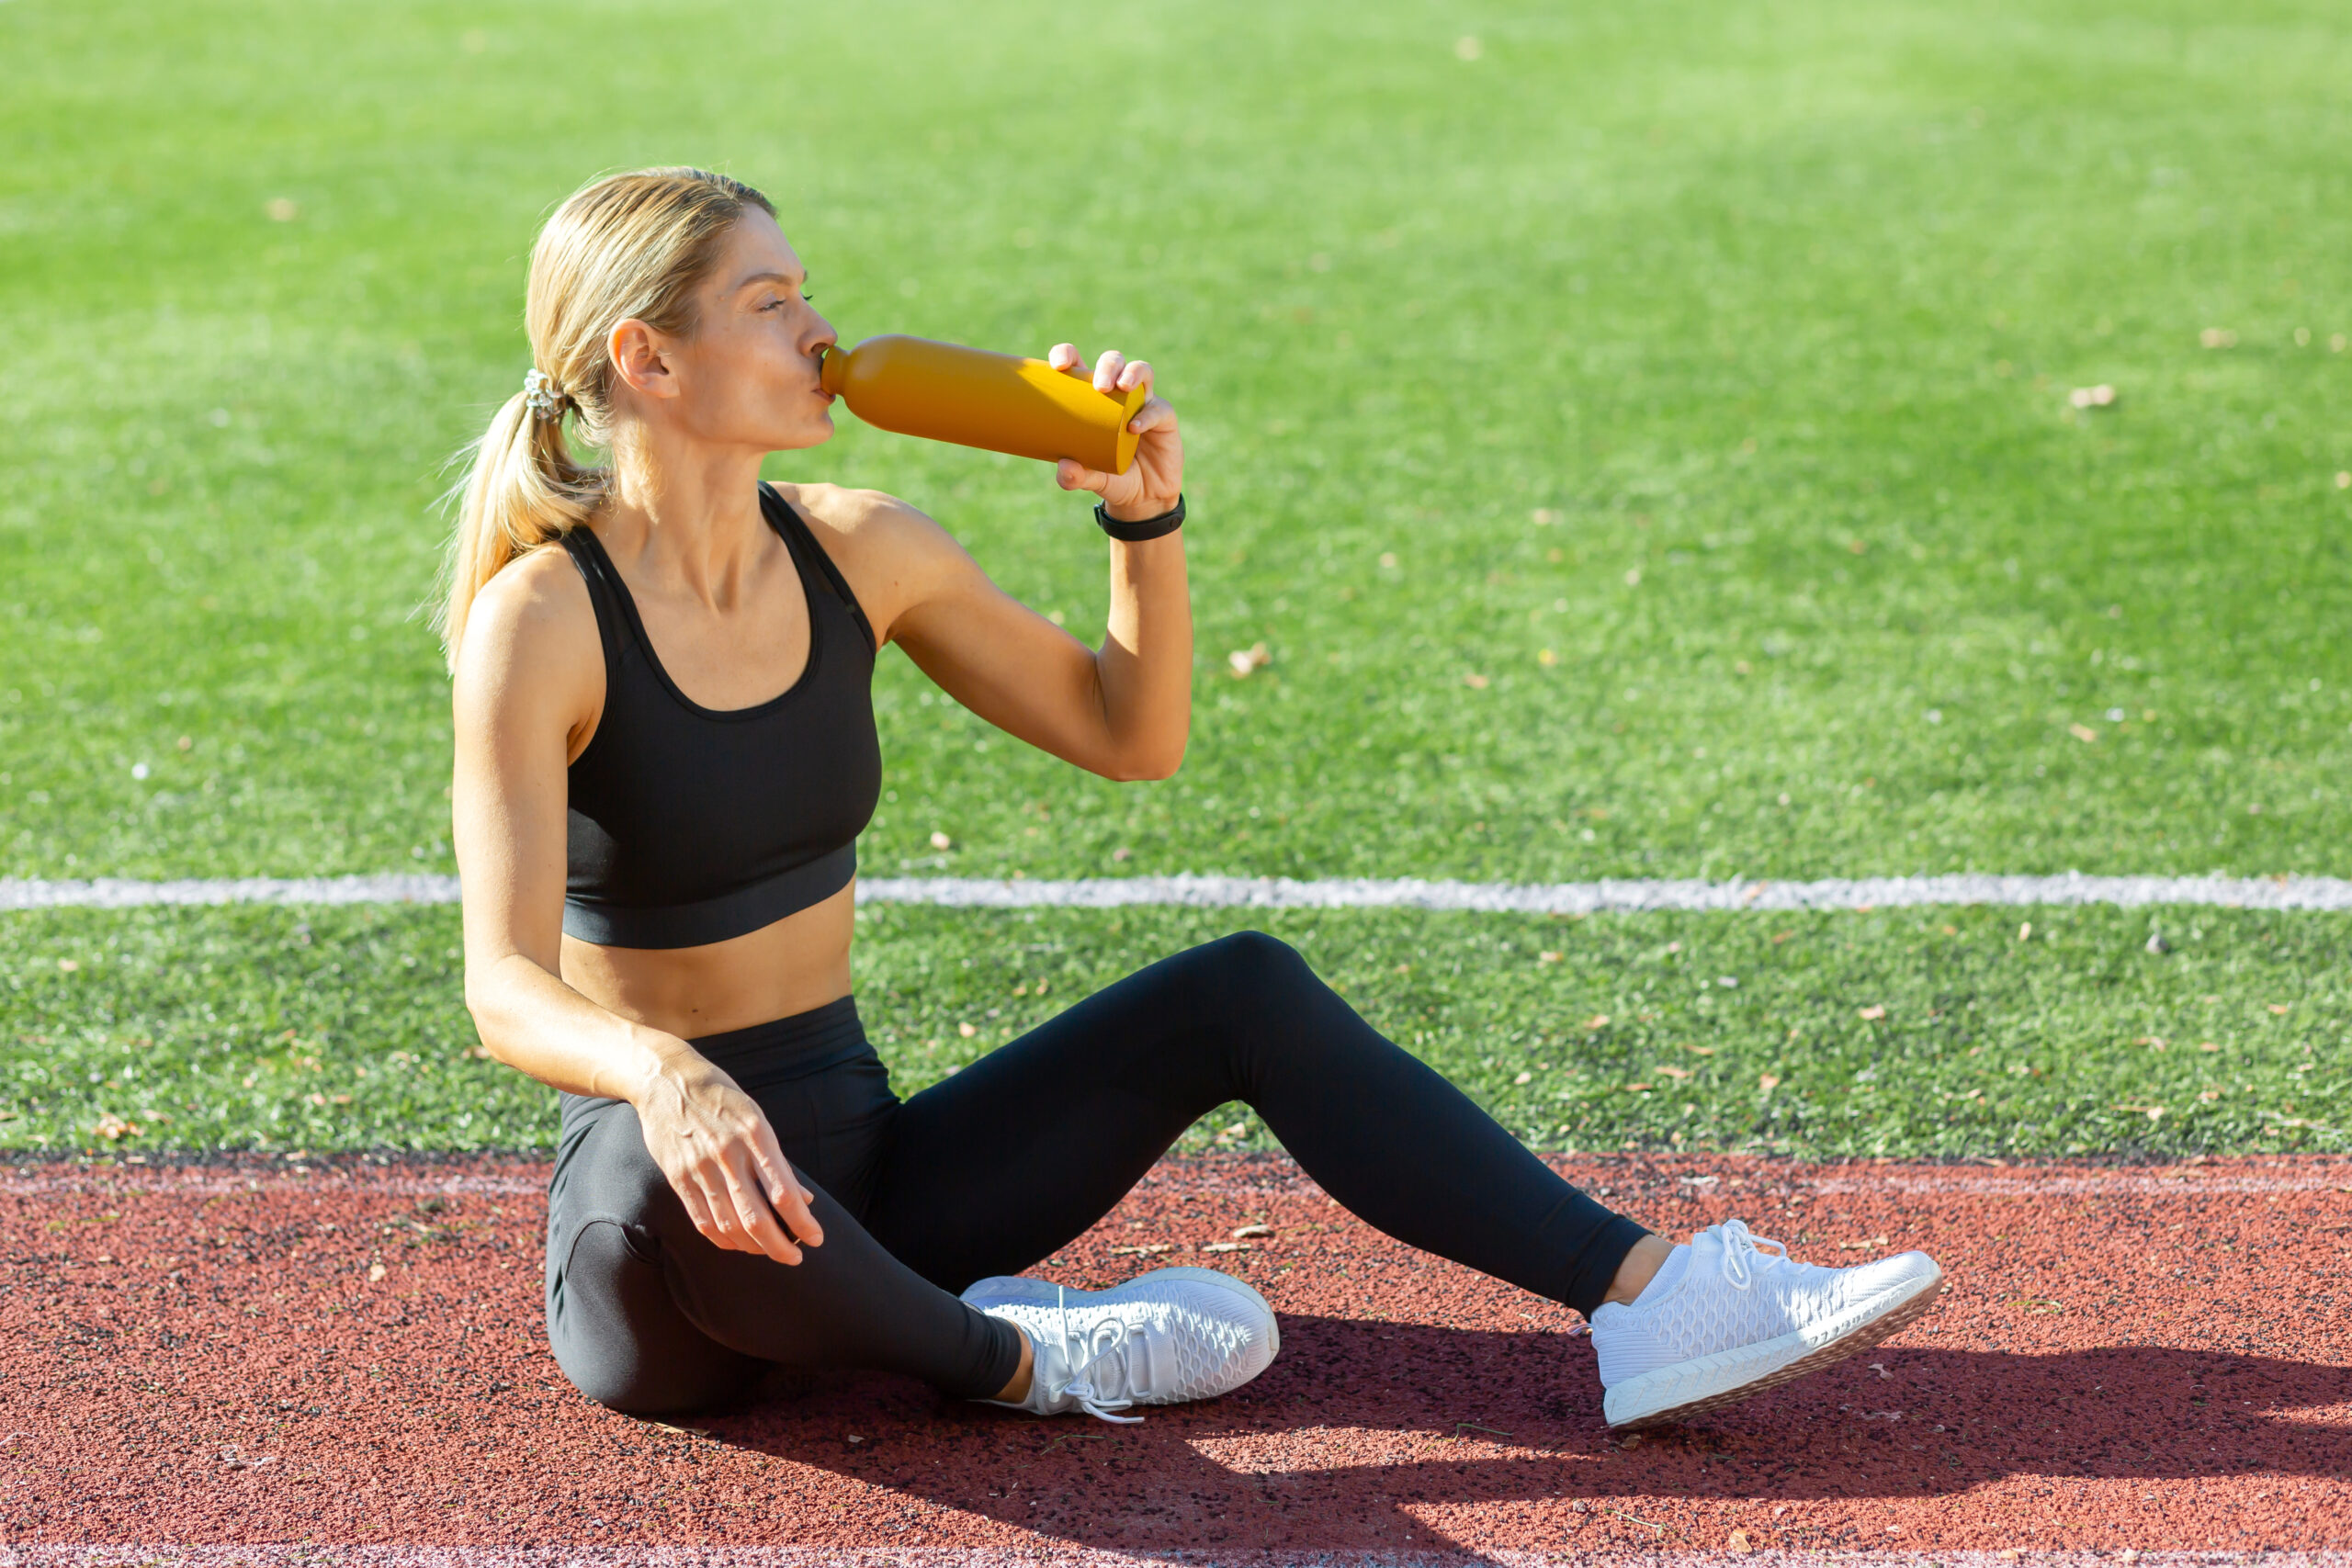 Blonde girl in black sports bra and black leggings sitting on a red track with green grass in the background drinking out of a orange reusable water bottle